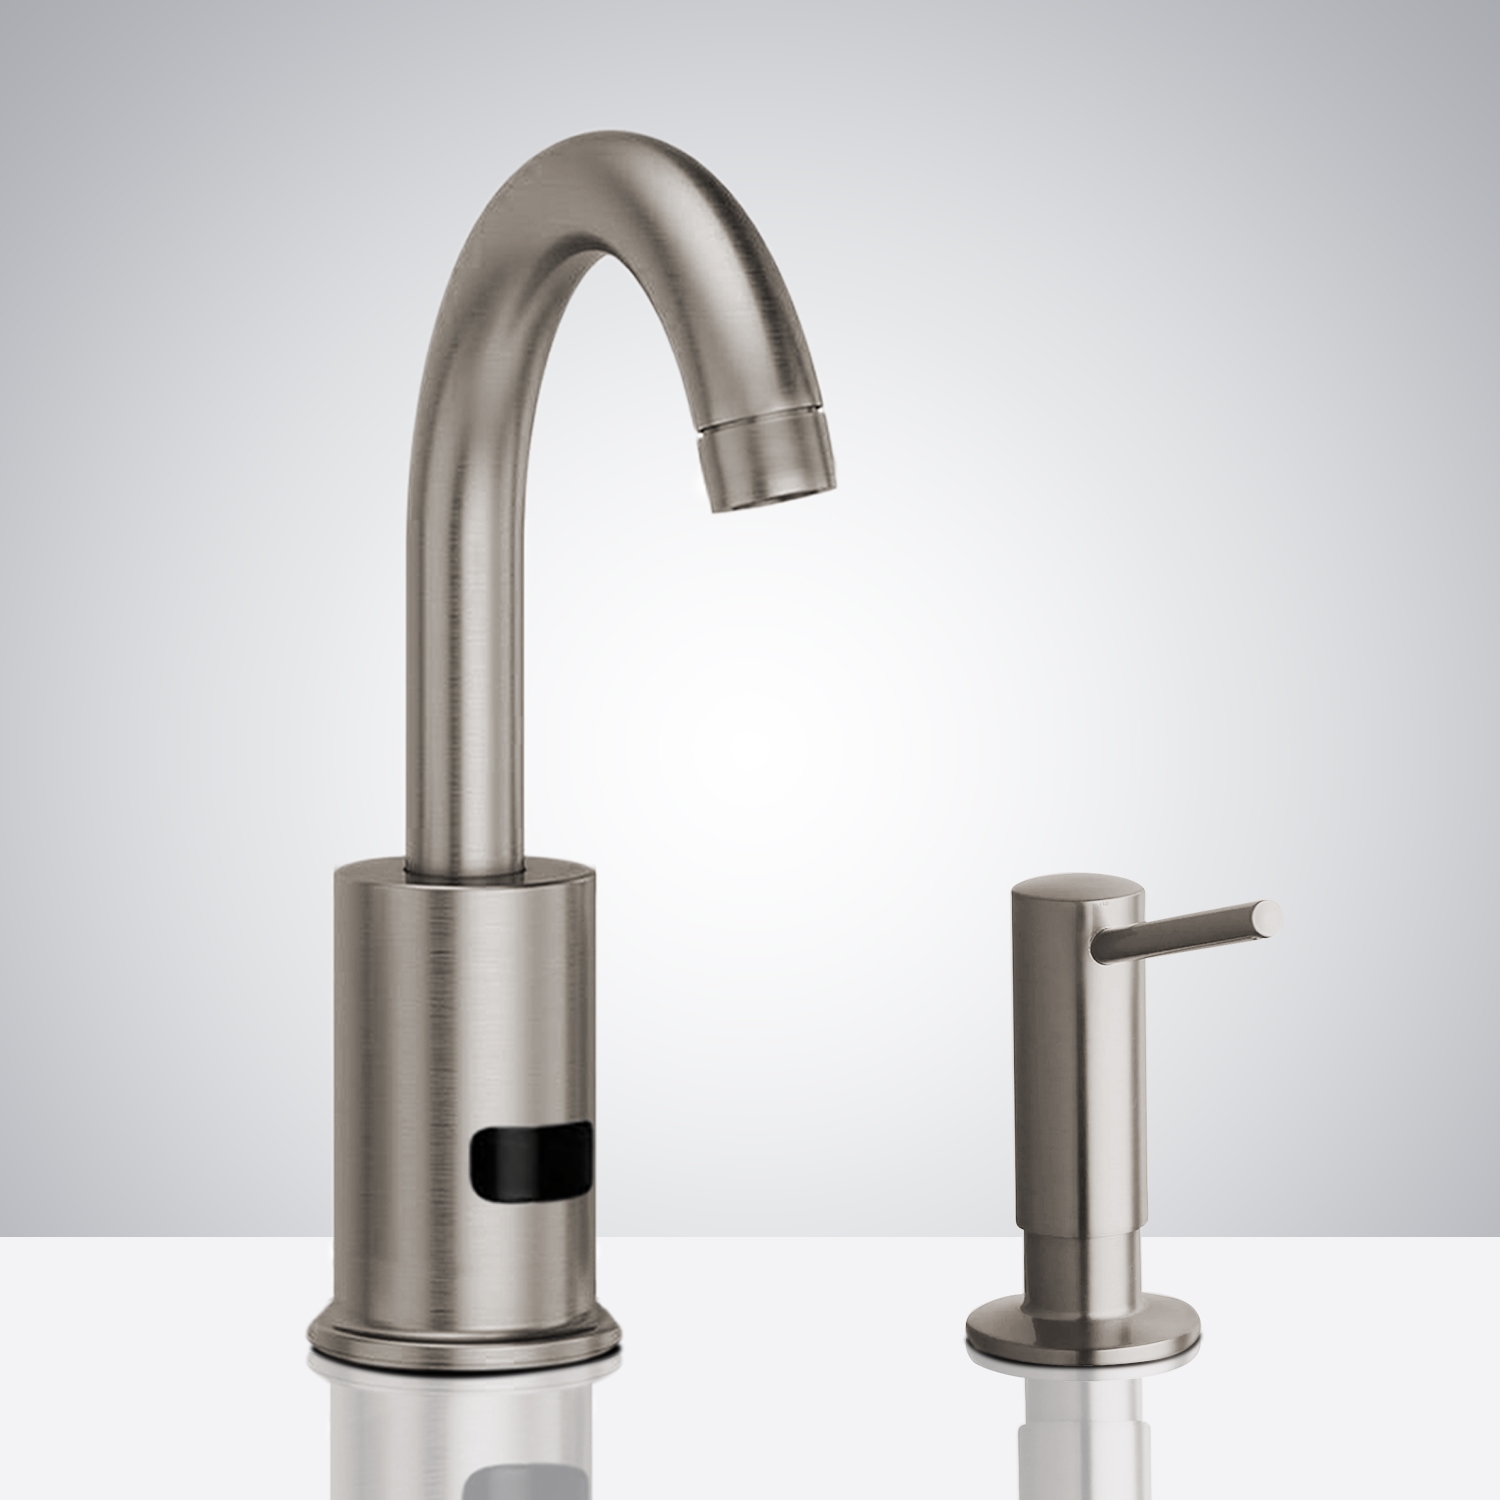 Fontana Commercial Brushed Nickel Touchless Automatic Sensor Faucet & Manual Soap Dispenser